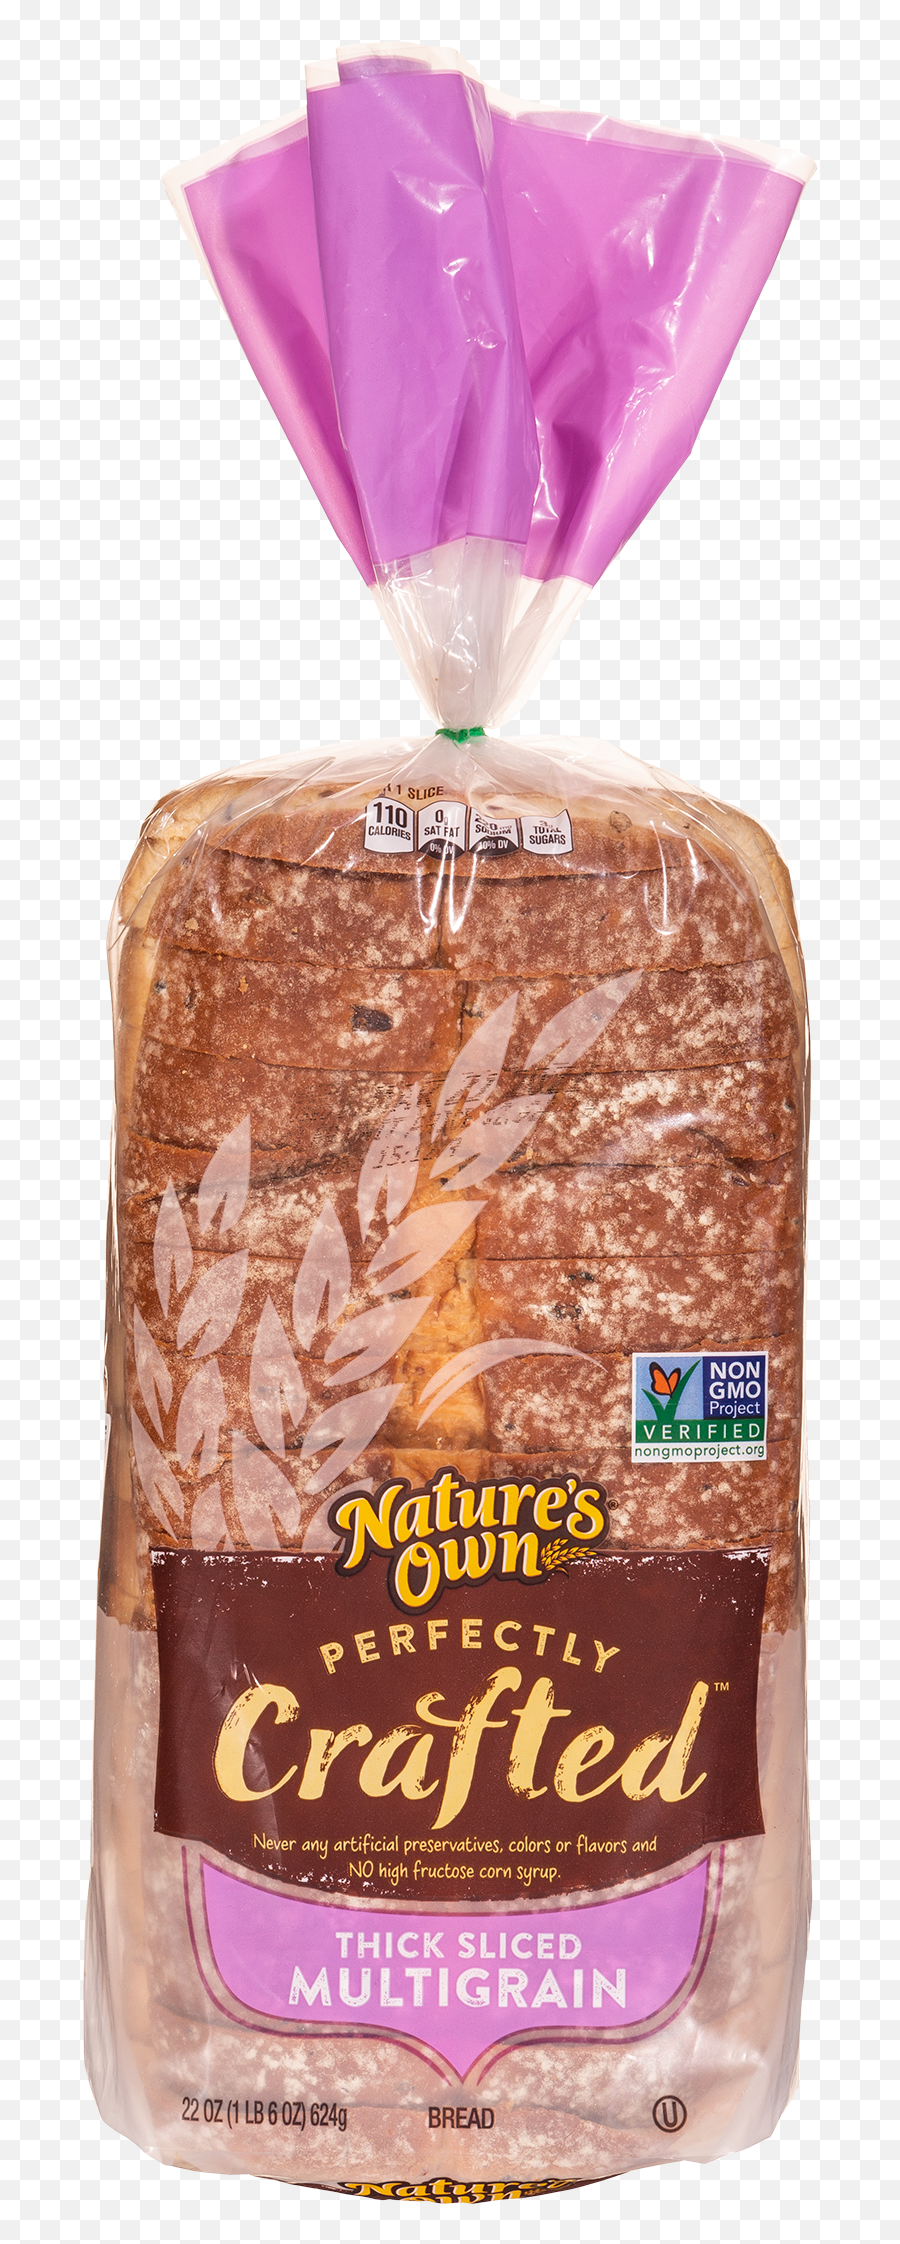 Natureu0027s Own Perfectly Crafted Thick Sliced Multigrain Bread Emoji,Slice Of Bread Png